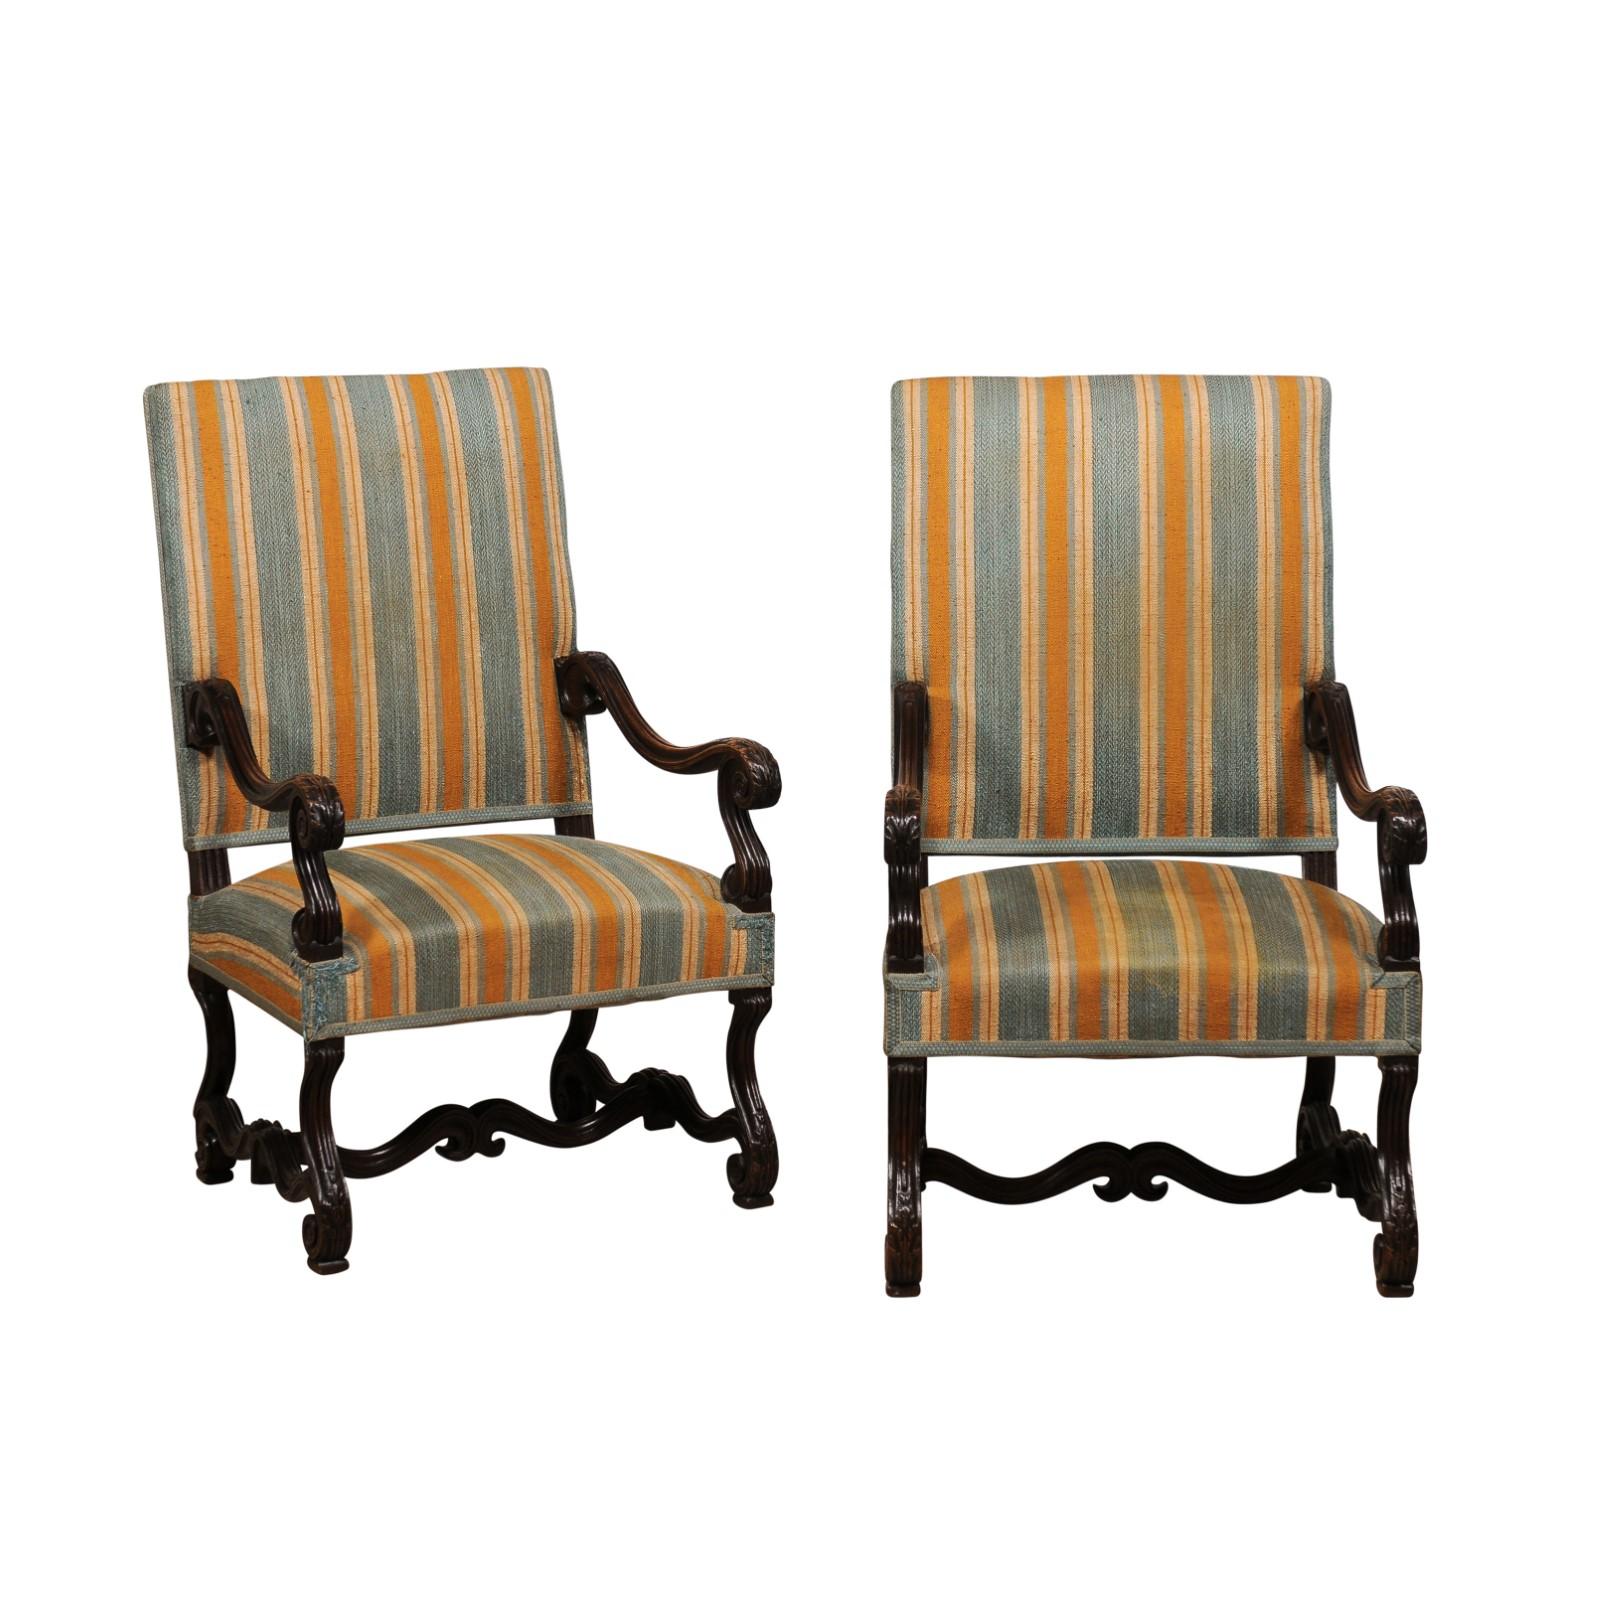 A pair of French Louis XIII style os de mouton carved walnut armchairs from the 19th century with large scrolling arms. Behold the timeless elegance of this pair of French Louis XIII style Os de Mouton armchairs, dated back to the 19th Century.